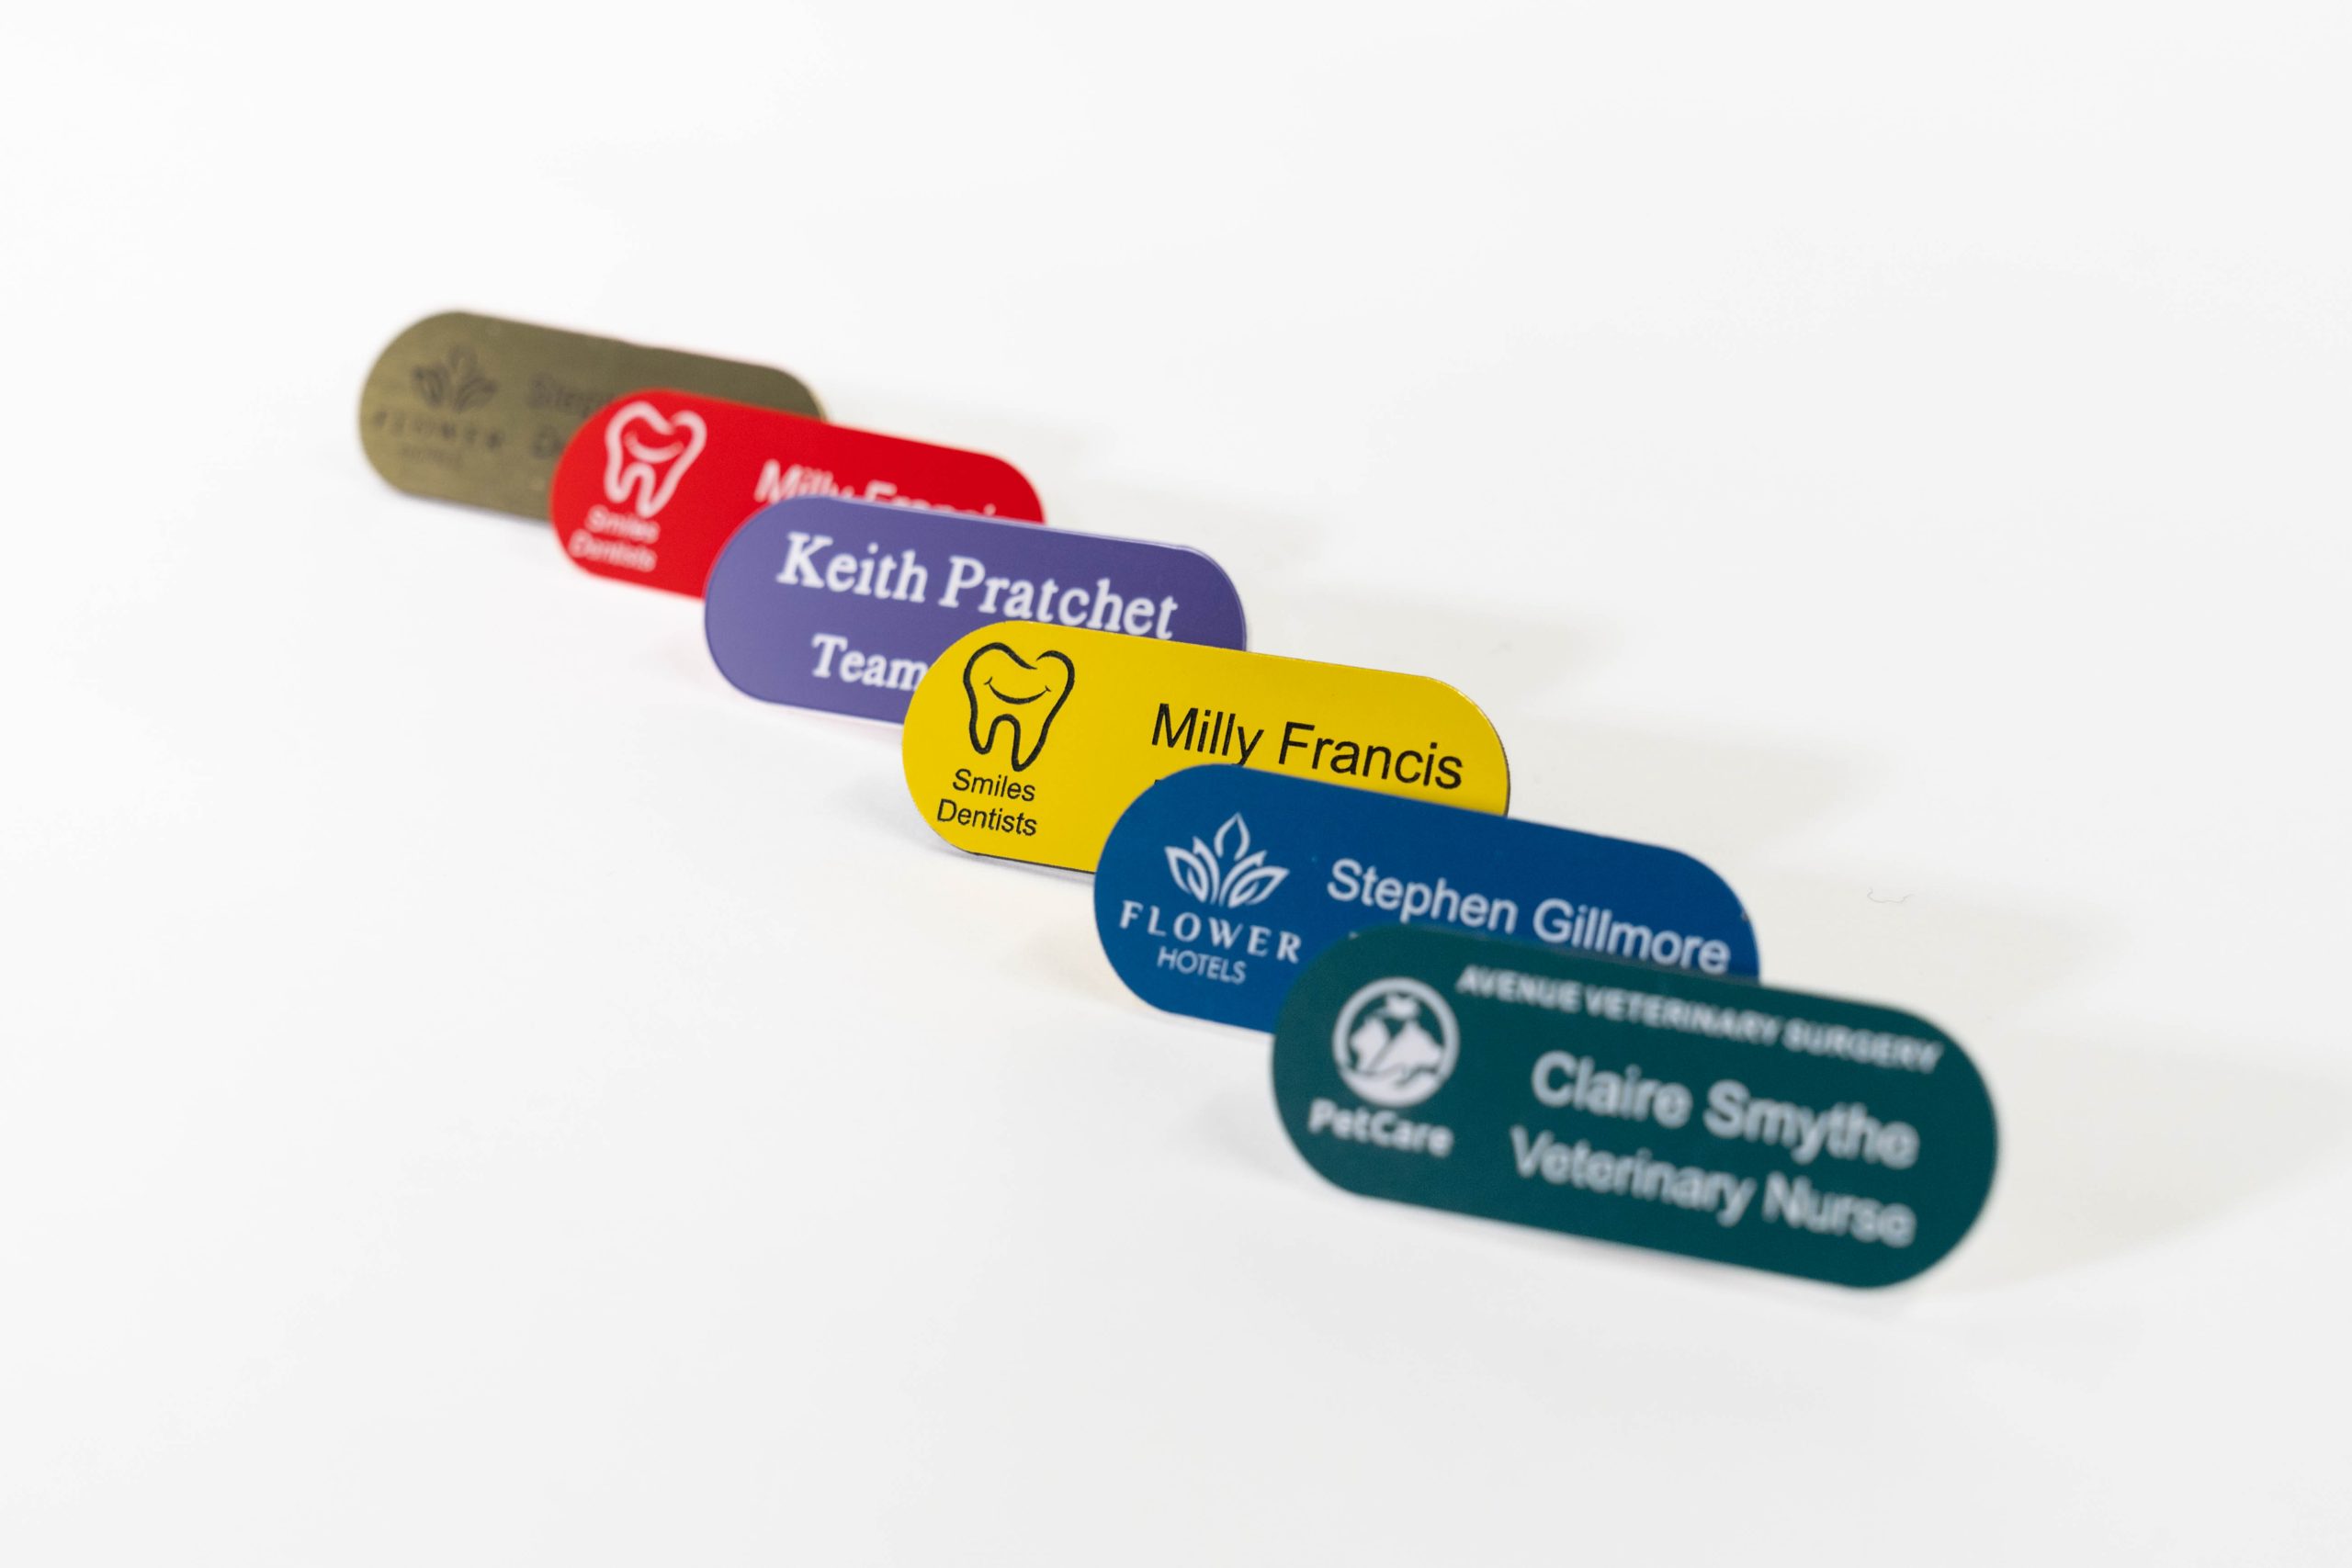 Various engraved name badges with and without logos on the left with oval corners.